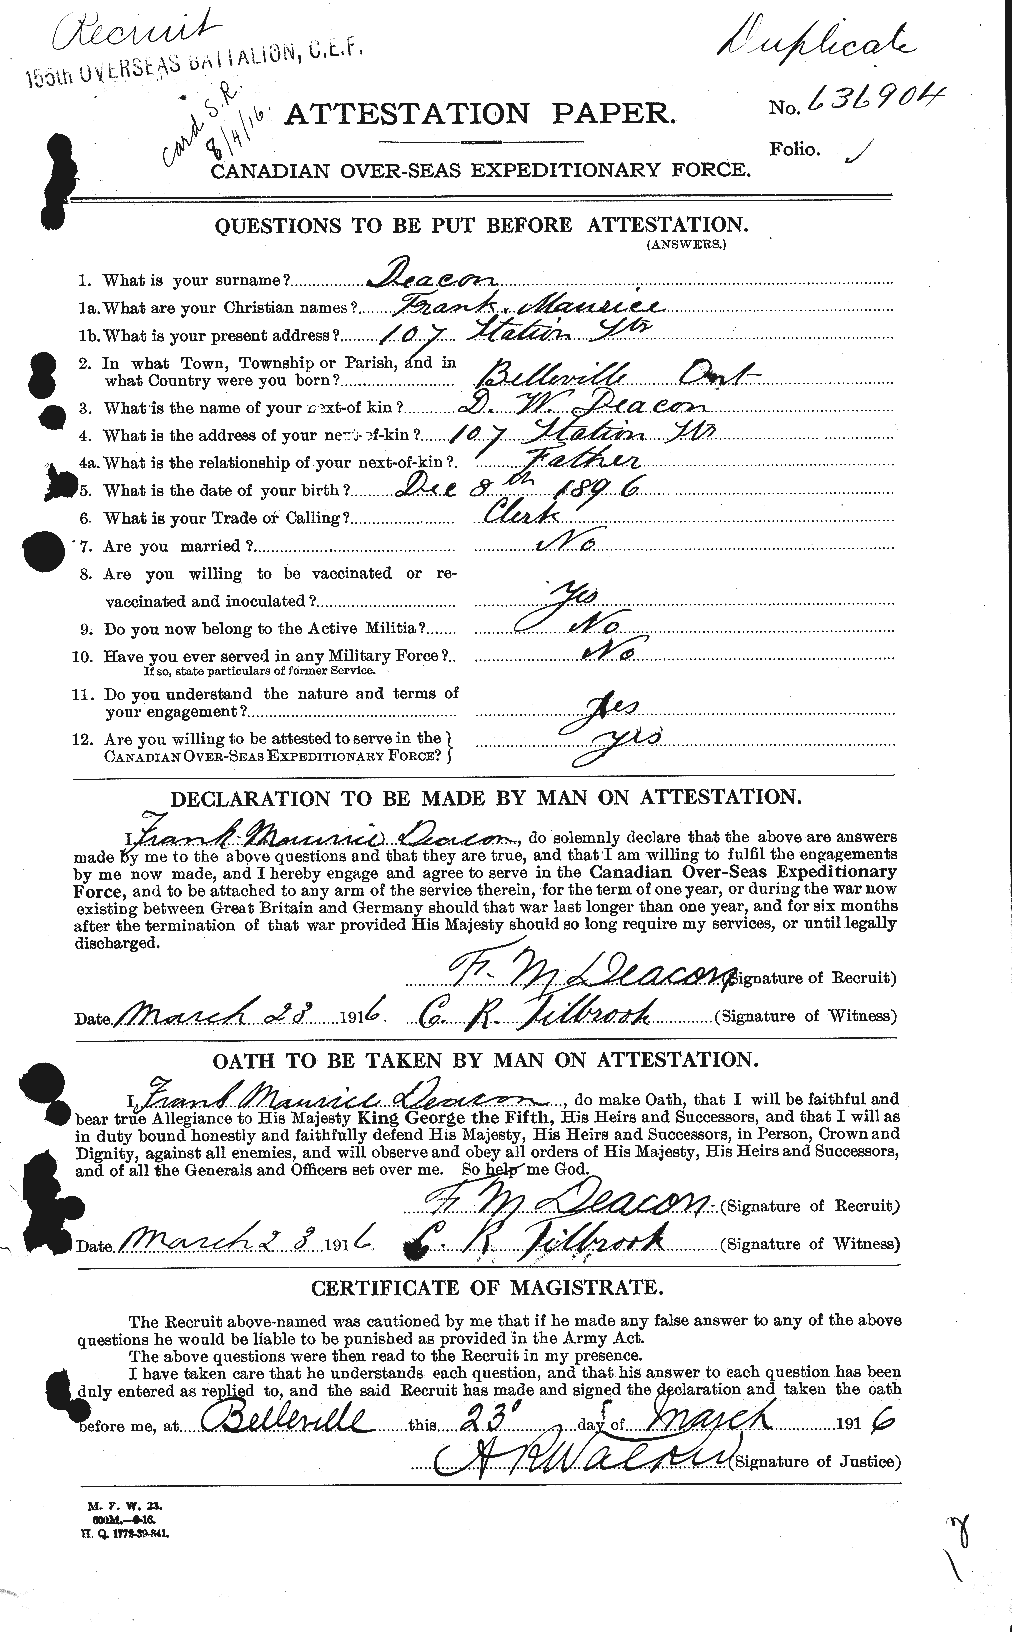 Personnel Records of the First World War - CEF 283688a